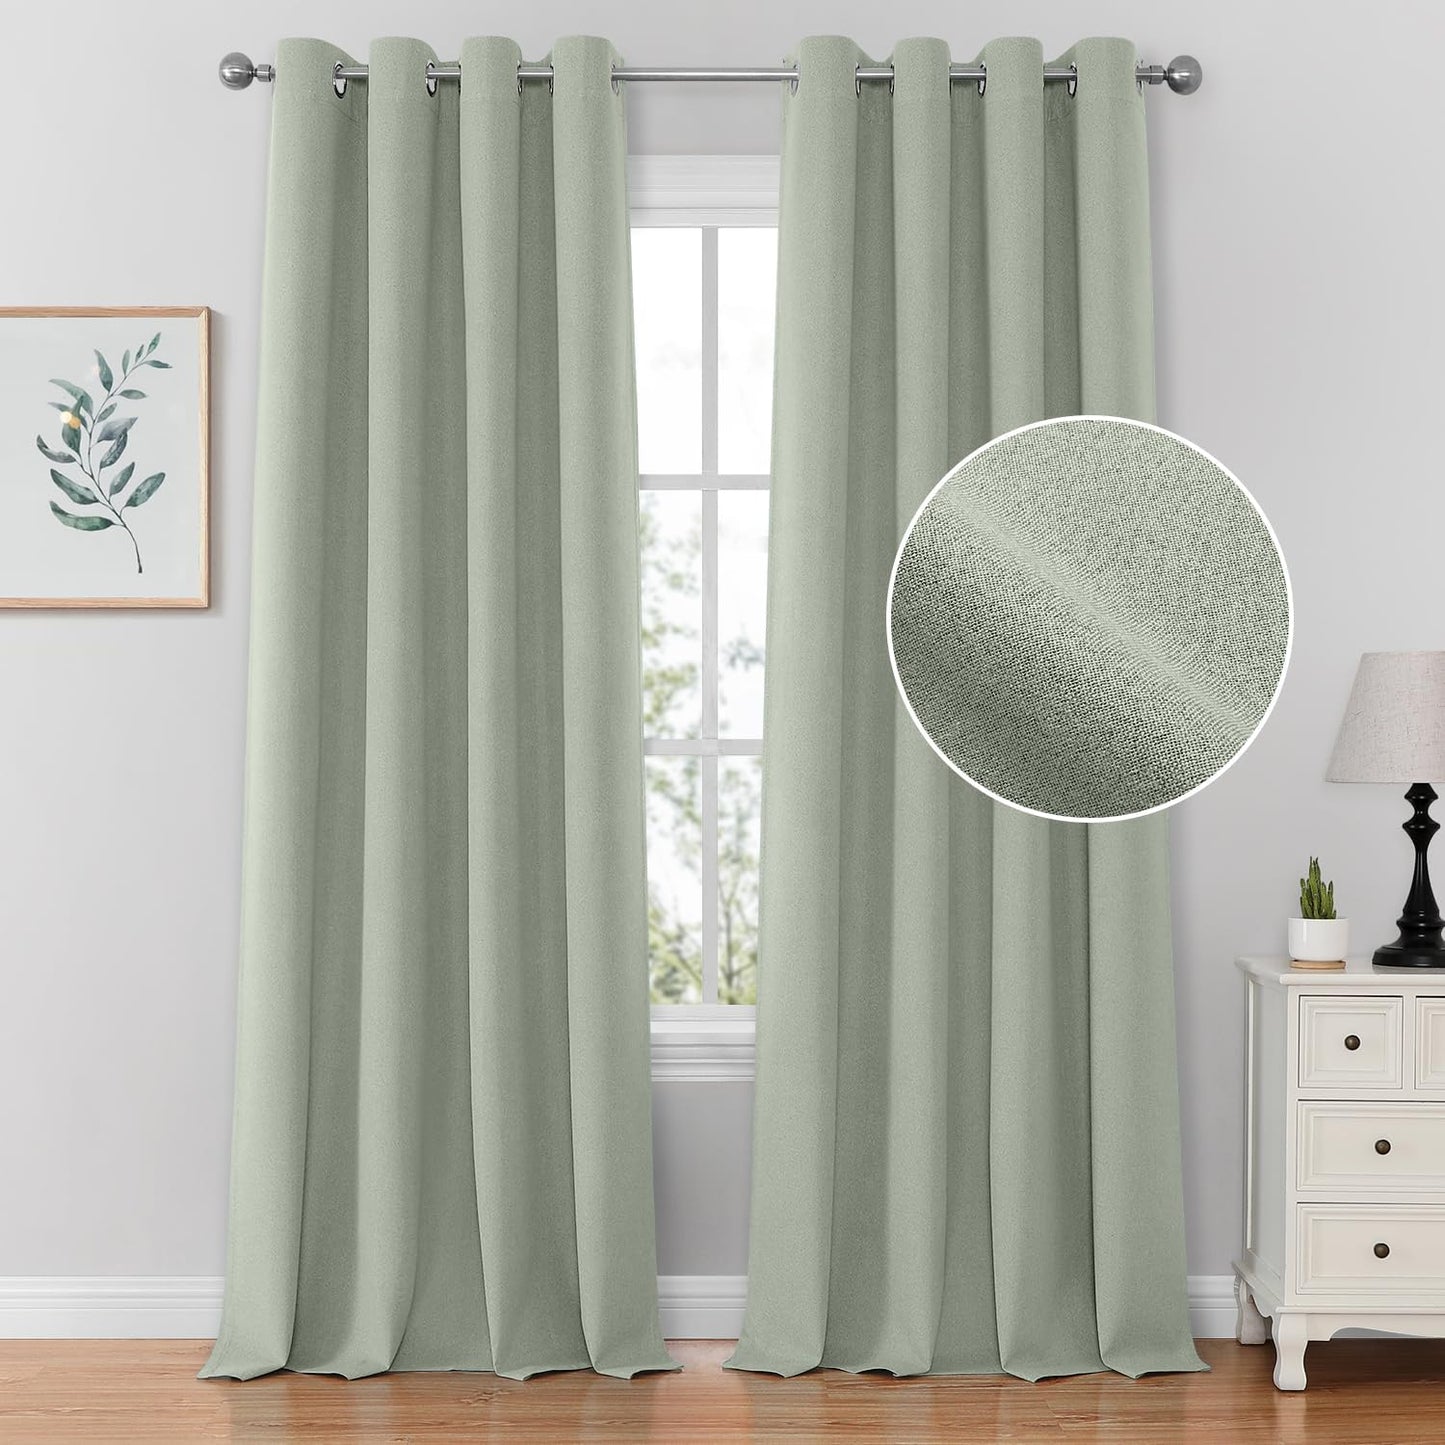 HOMEIDEAS 100% Blush Pink Linen Blackout Curtains for Bedroom, 52 X 84 Inch Room Darkening Curtains for Living, Faux Linen Thermal Insulated Full Black Out Grommet Window Curtains/Drapes  HOMEIDEAS Sage Green W52" X L84" 